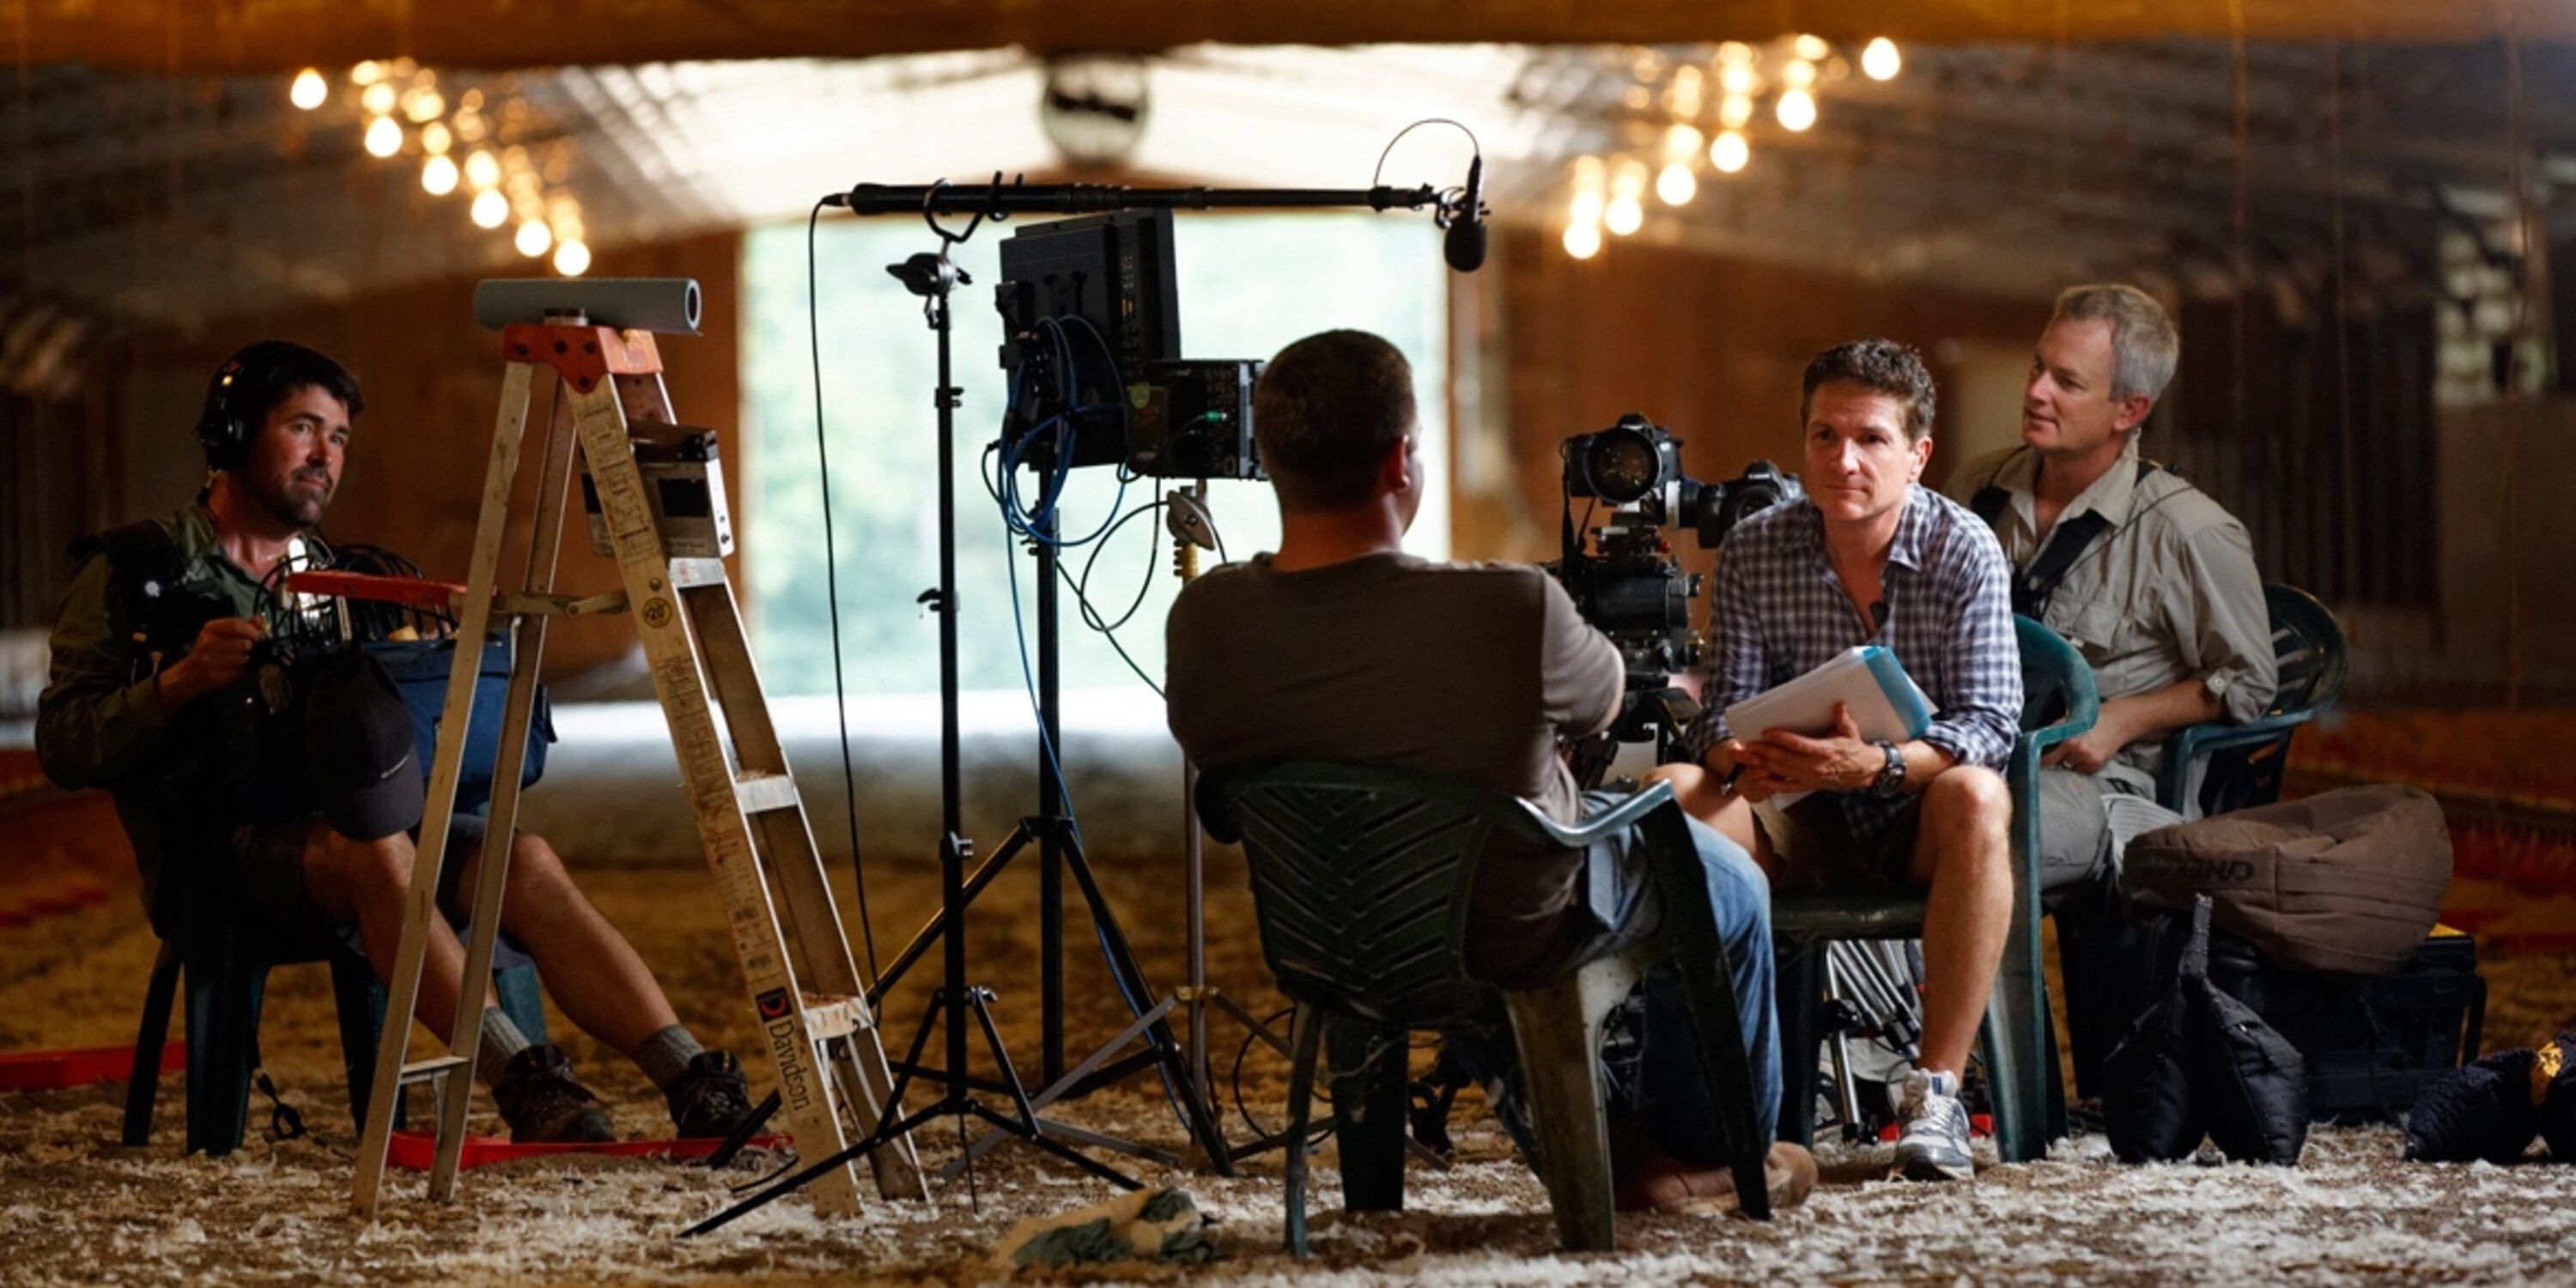 A rancher is interviewed in a barn